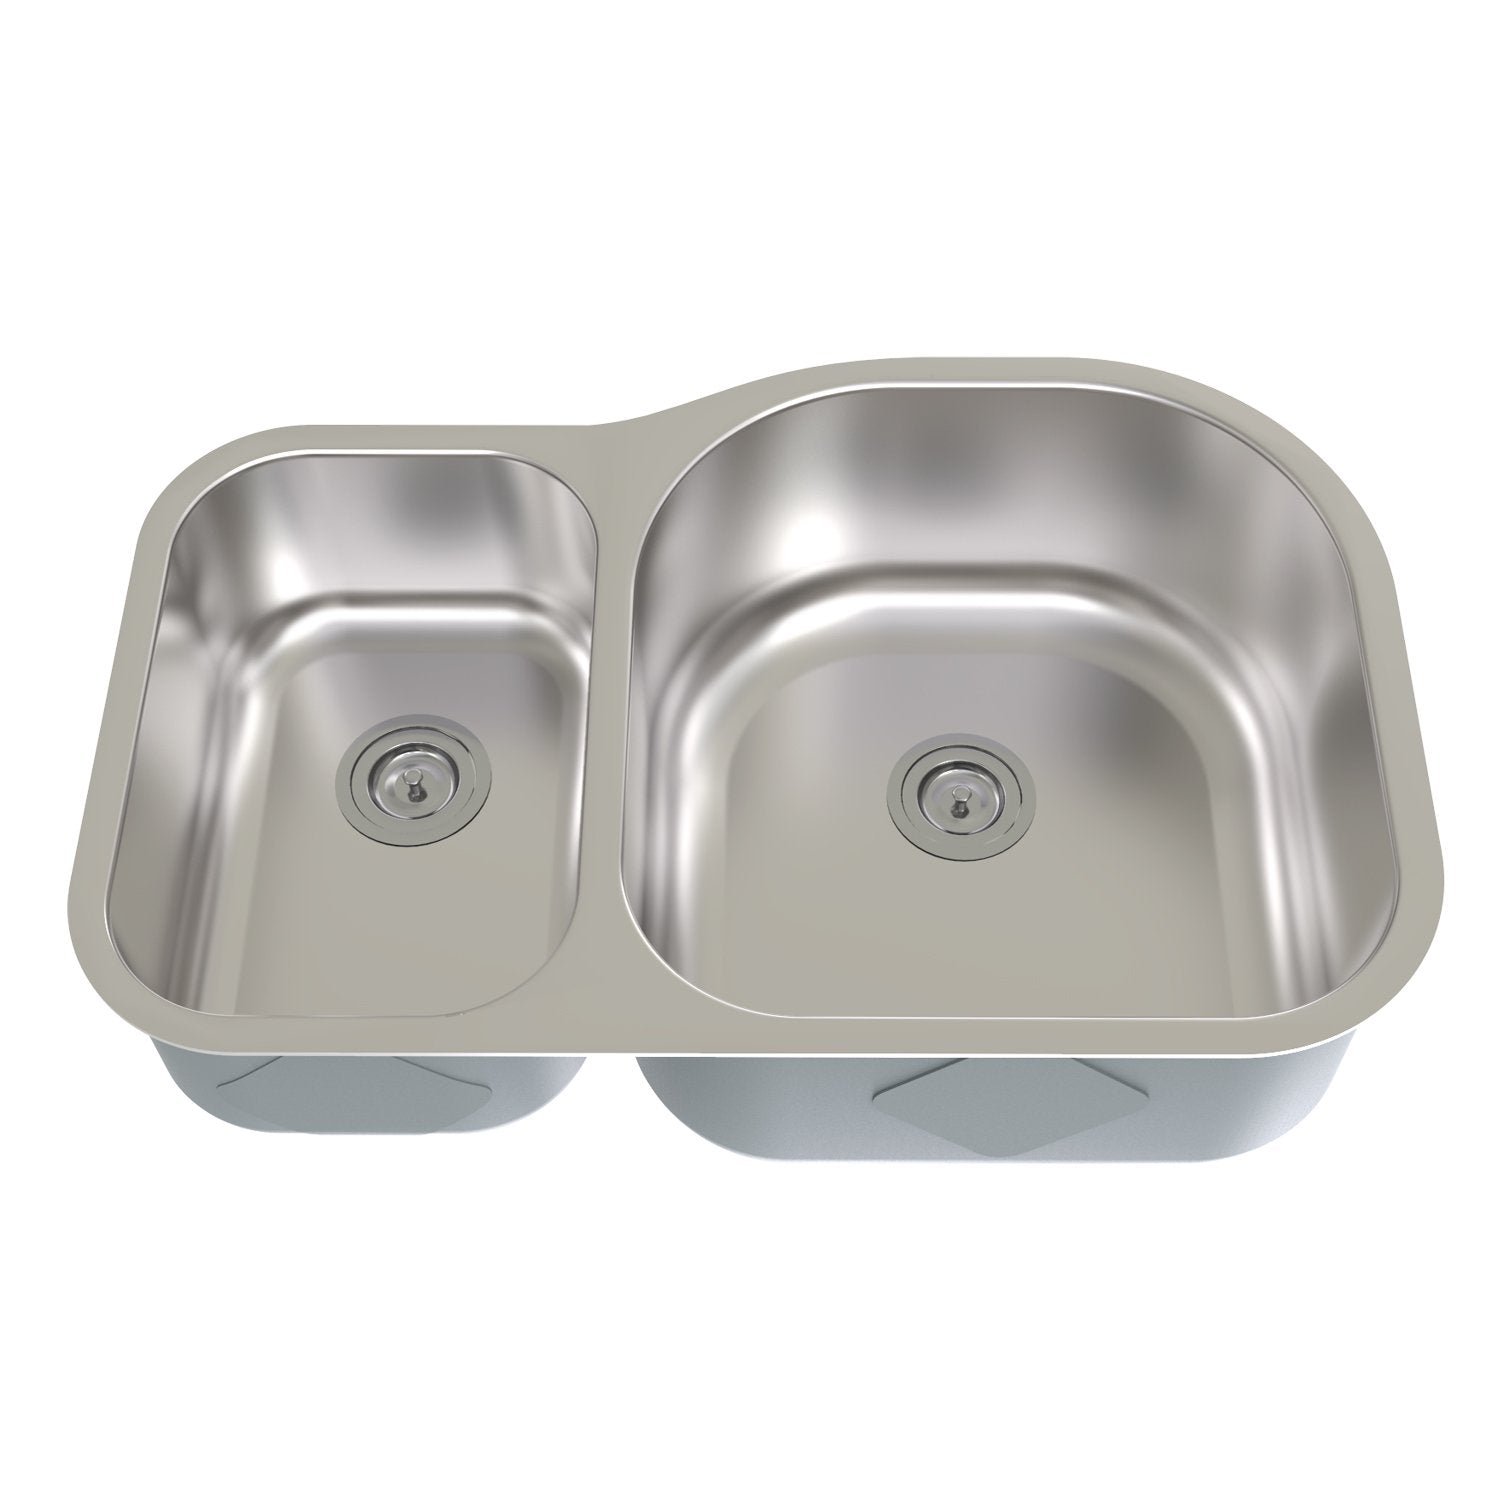 DAX 30/70 Double Bowl Undermount Kitchen Sink, 18 Gauge Stainless Steel, Brushed Finish, 31 x 21 x 8 Inches (KA-3121R)